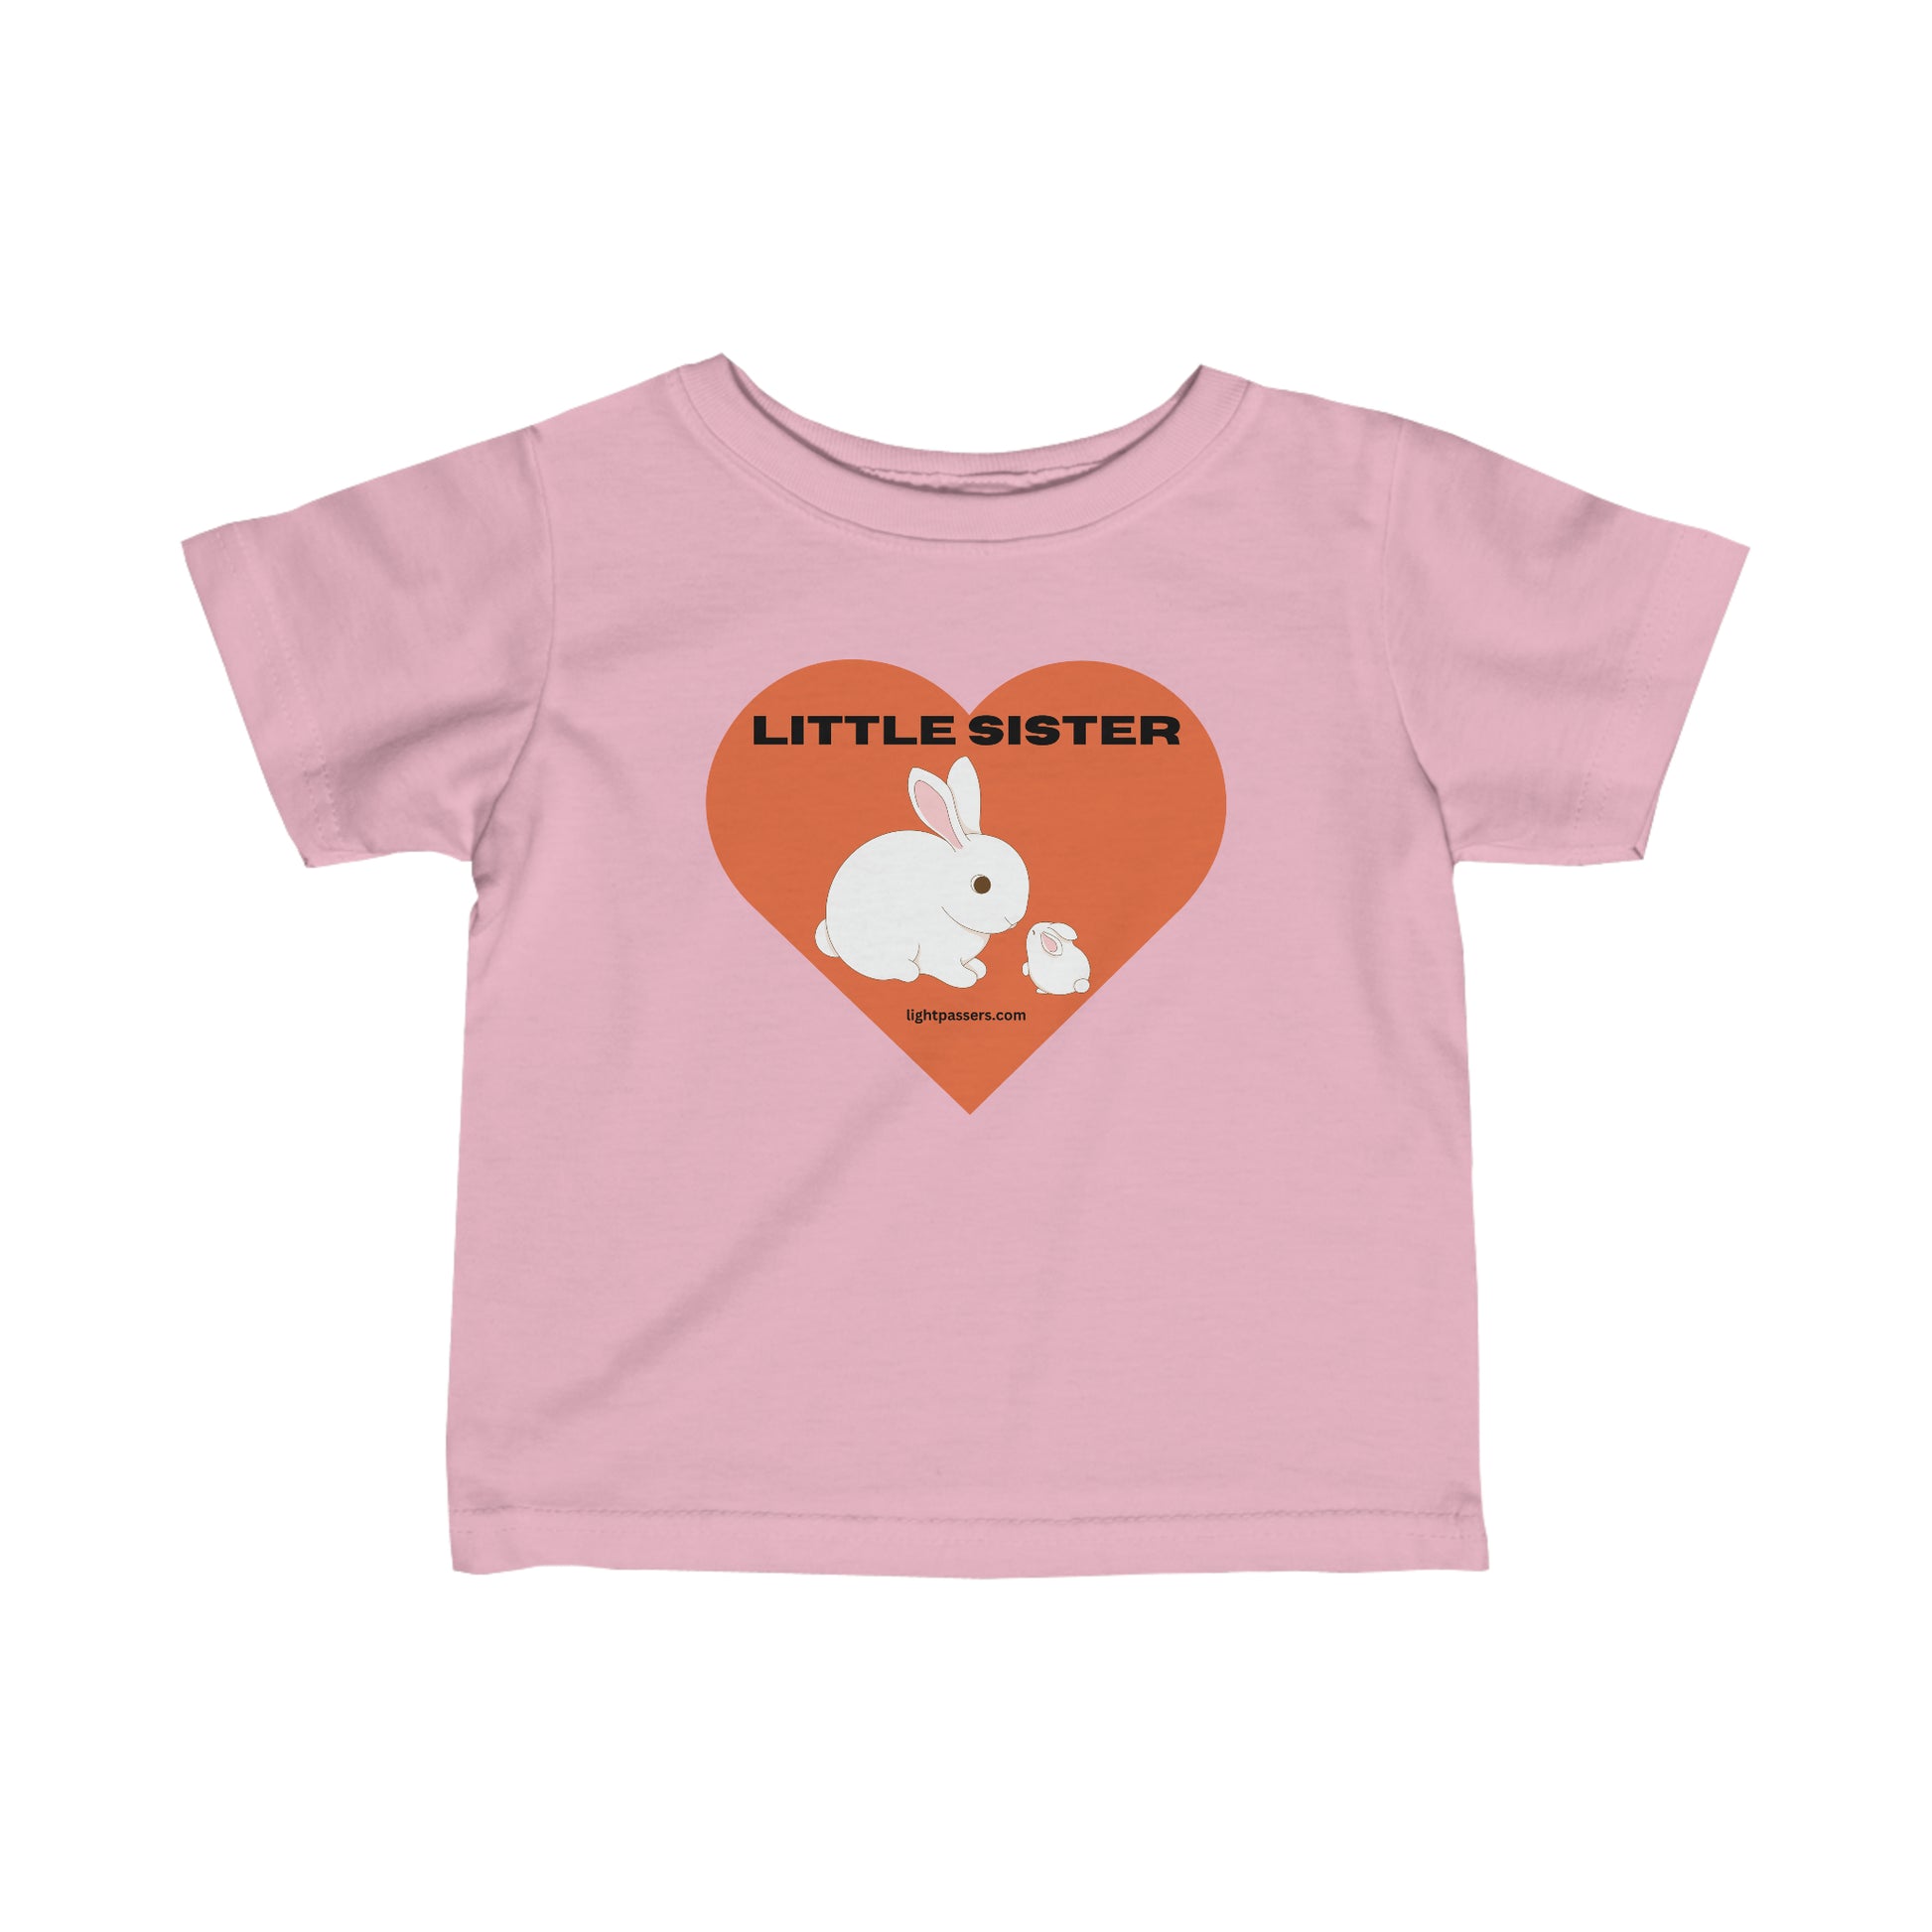 Infant fine jersey tee with a rabbit and heart design, perfect for little sisters. Side seams, ribbed knitting, and taped shoulders for durability and comfort. 100% Combed ringspun cotton.